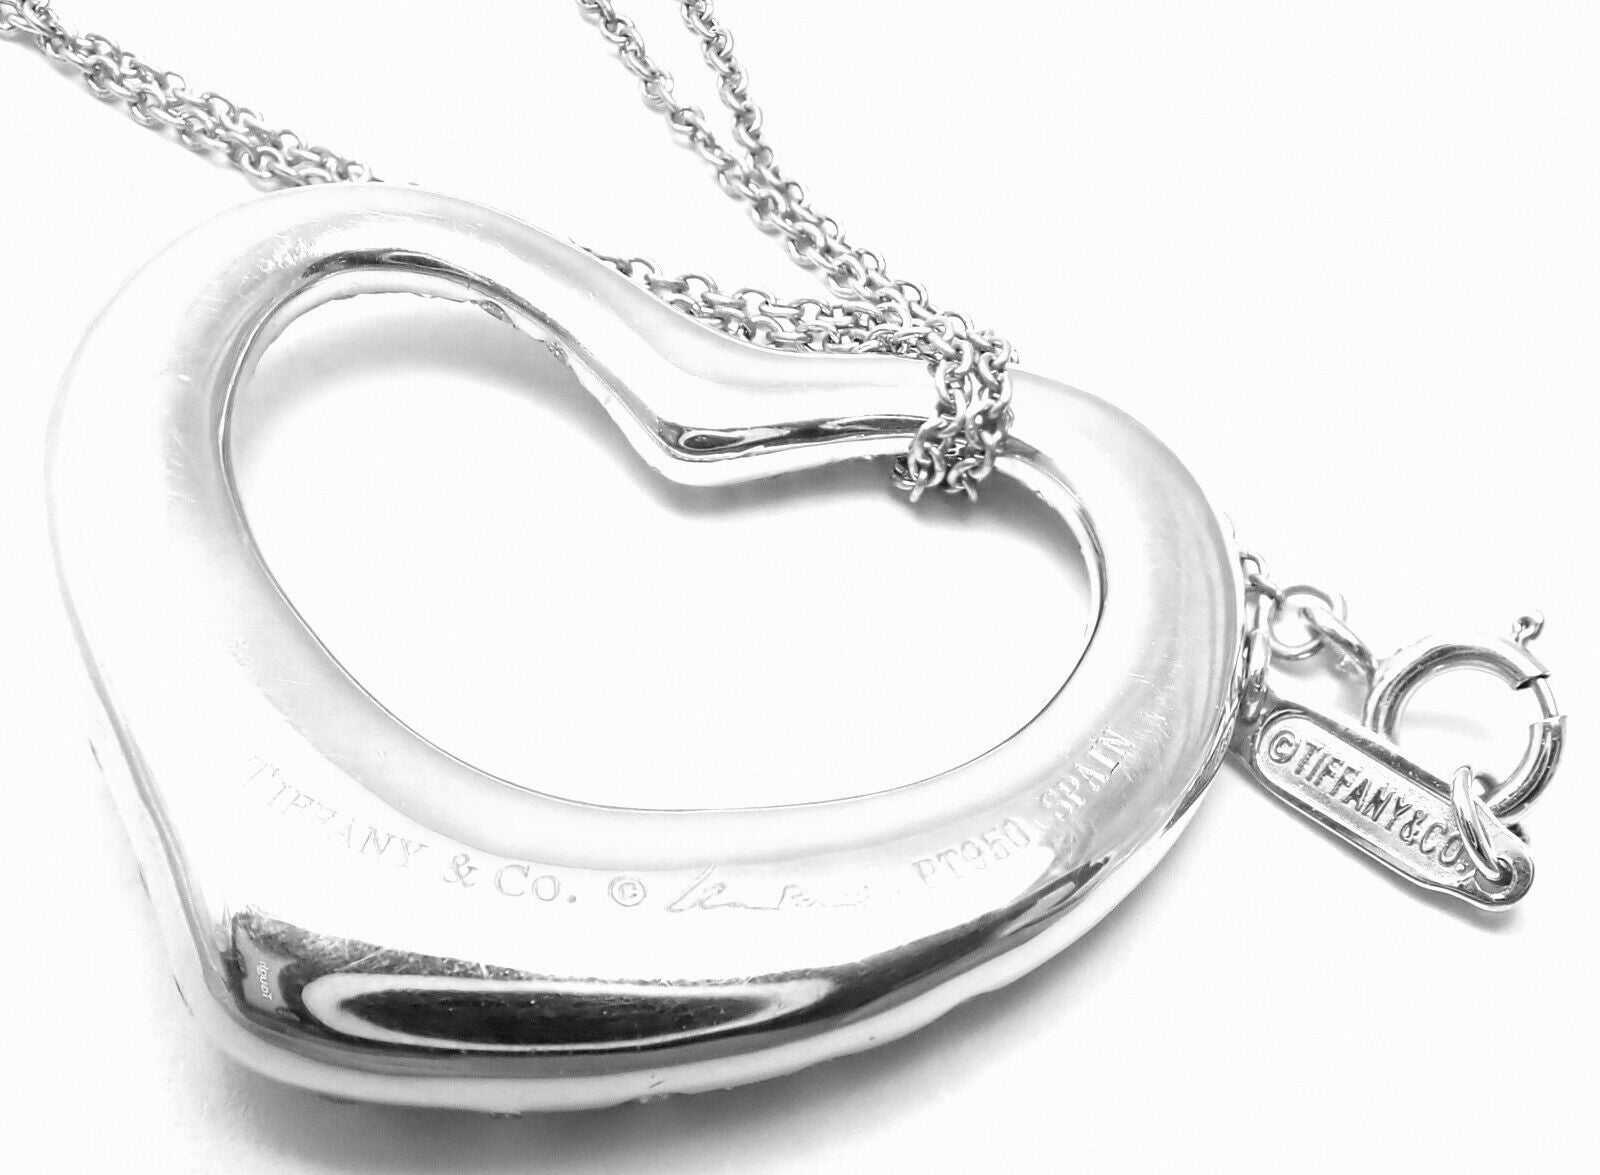 Tiffany & Co. Jewelry & Watches:Fine Jewelry:Necklaces & Pendants Authentic! Tiffany & Co Peretti Platinum 3ct Diamond Large Open Heart Necklace